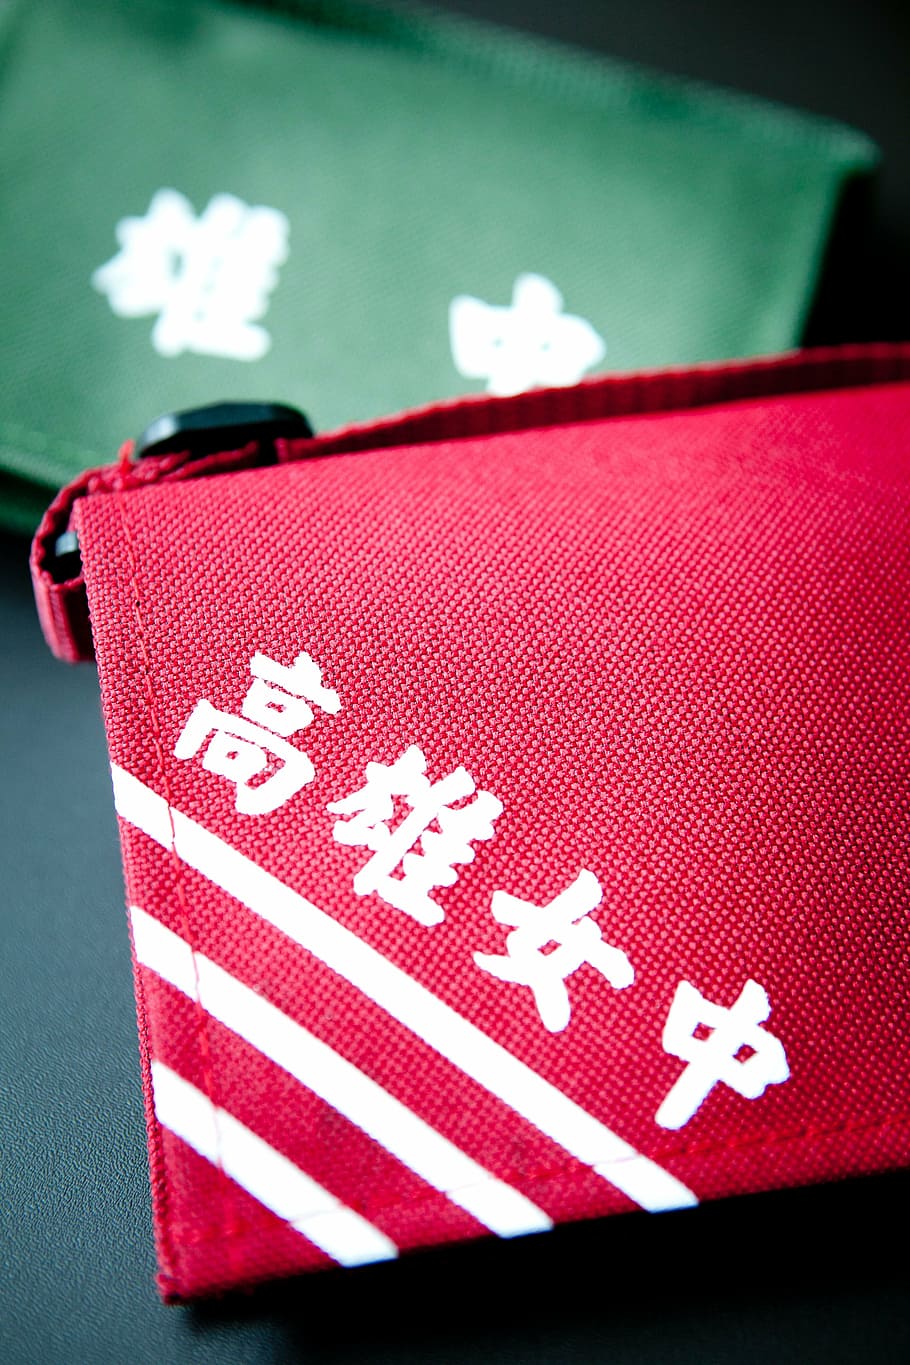 schoolbag, attend class, school, asia, china, red, close-up, indoors, colored background, studio shot